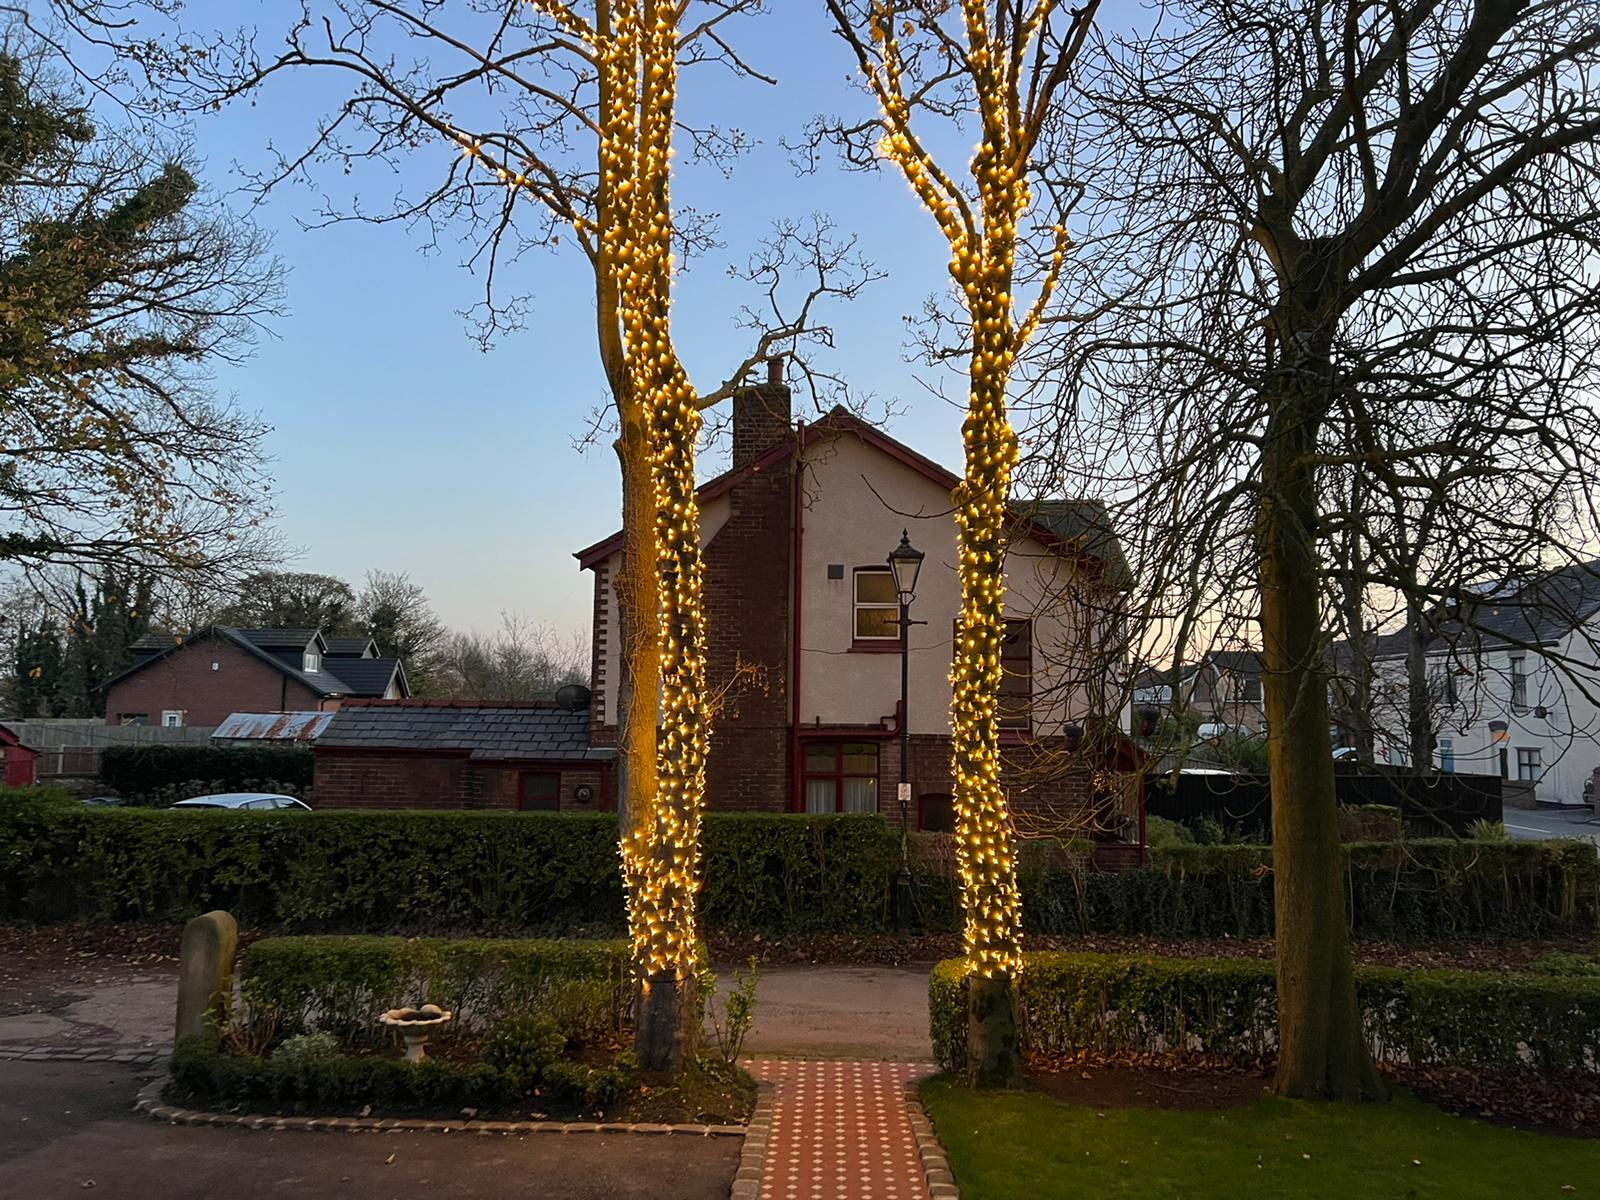 A beautifully renovated home in Hesketh Bank in Lancashire has brought huge smiles to peoples faces thanks to over 20,000 lights in the trees outside which were installed by IllumiDex UK Ltd